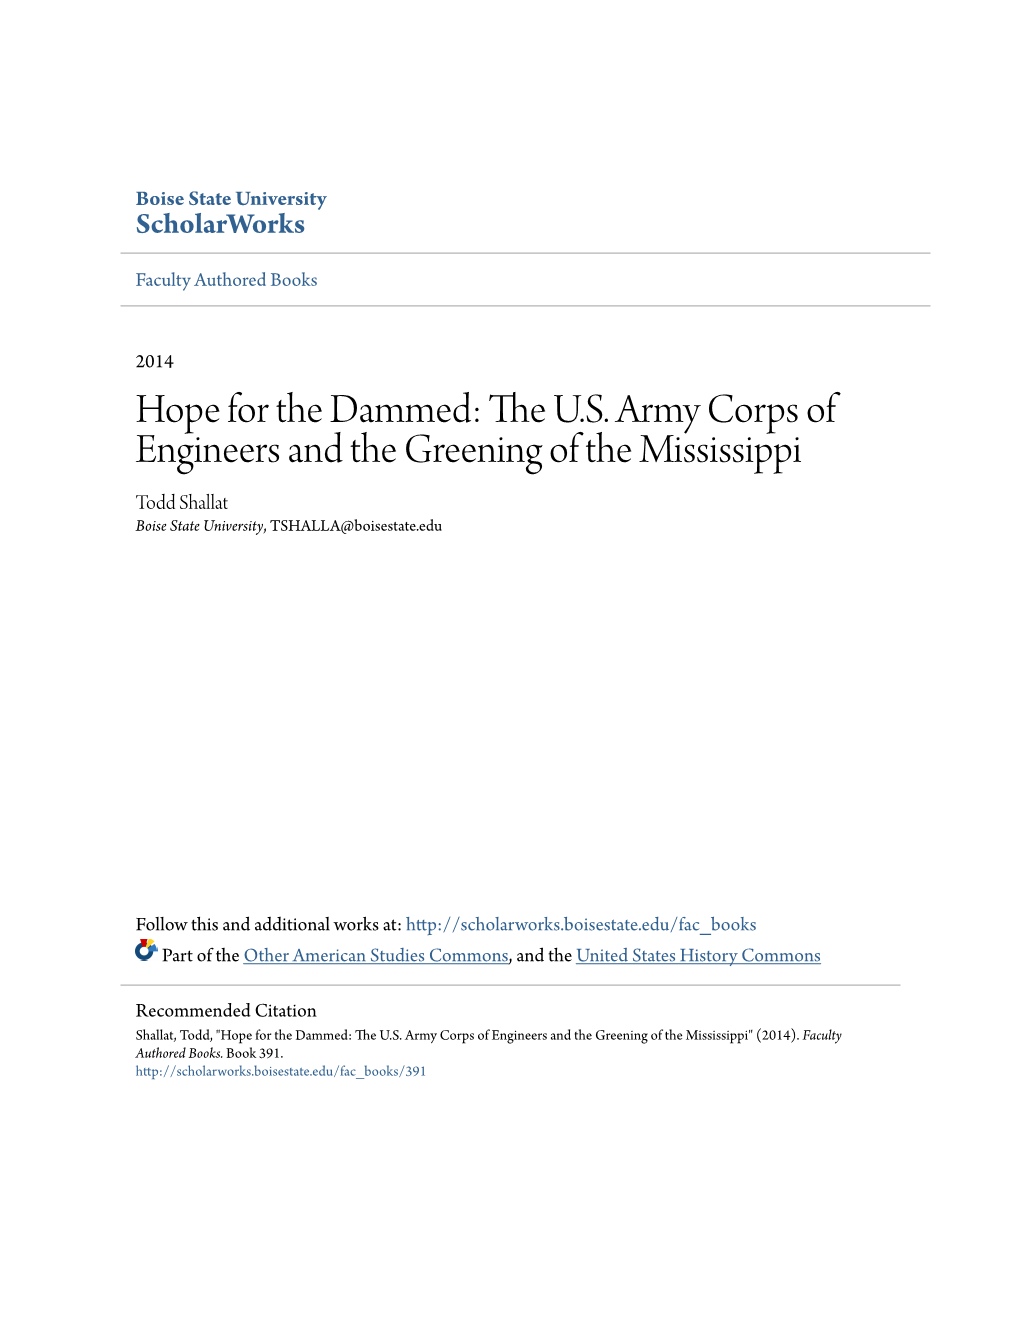 Hope for the Dammed: the U.S. Army Corps of Engineers and The